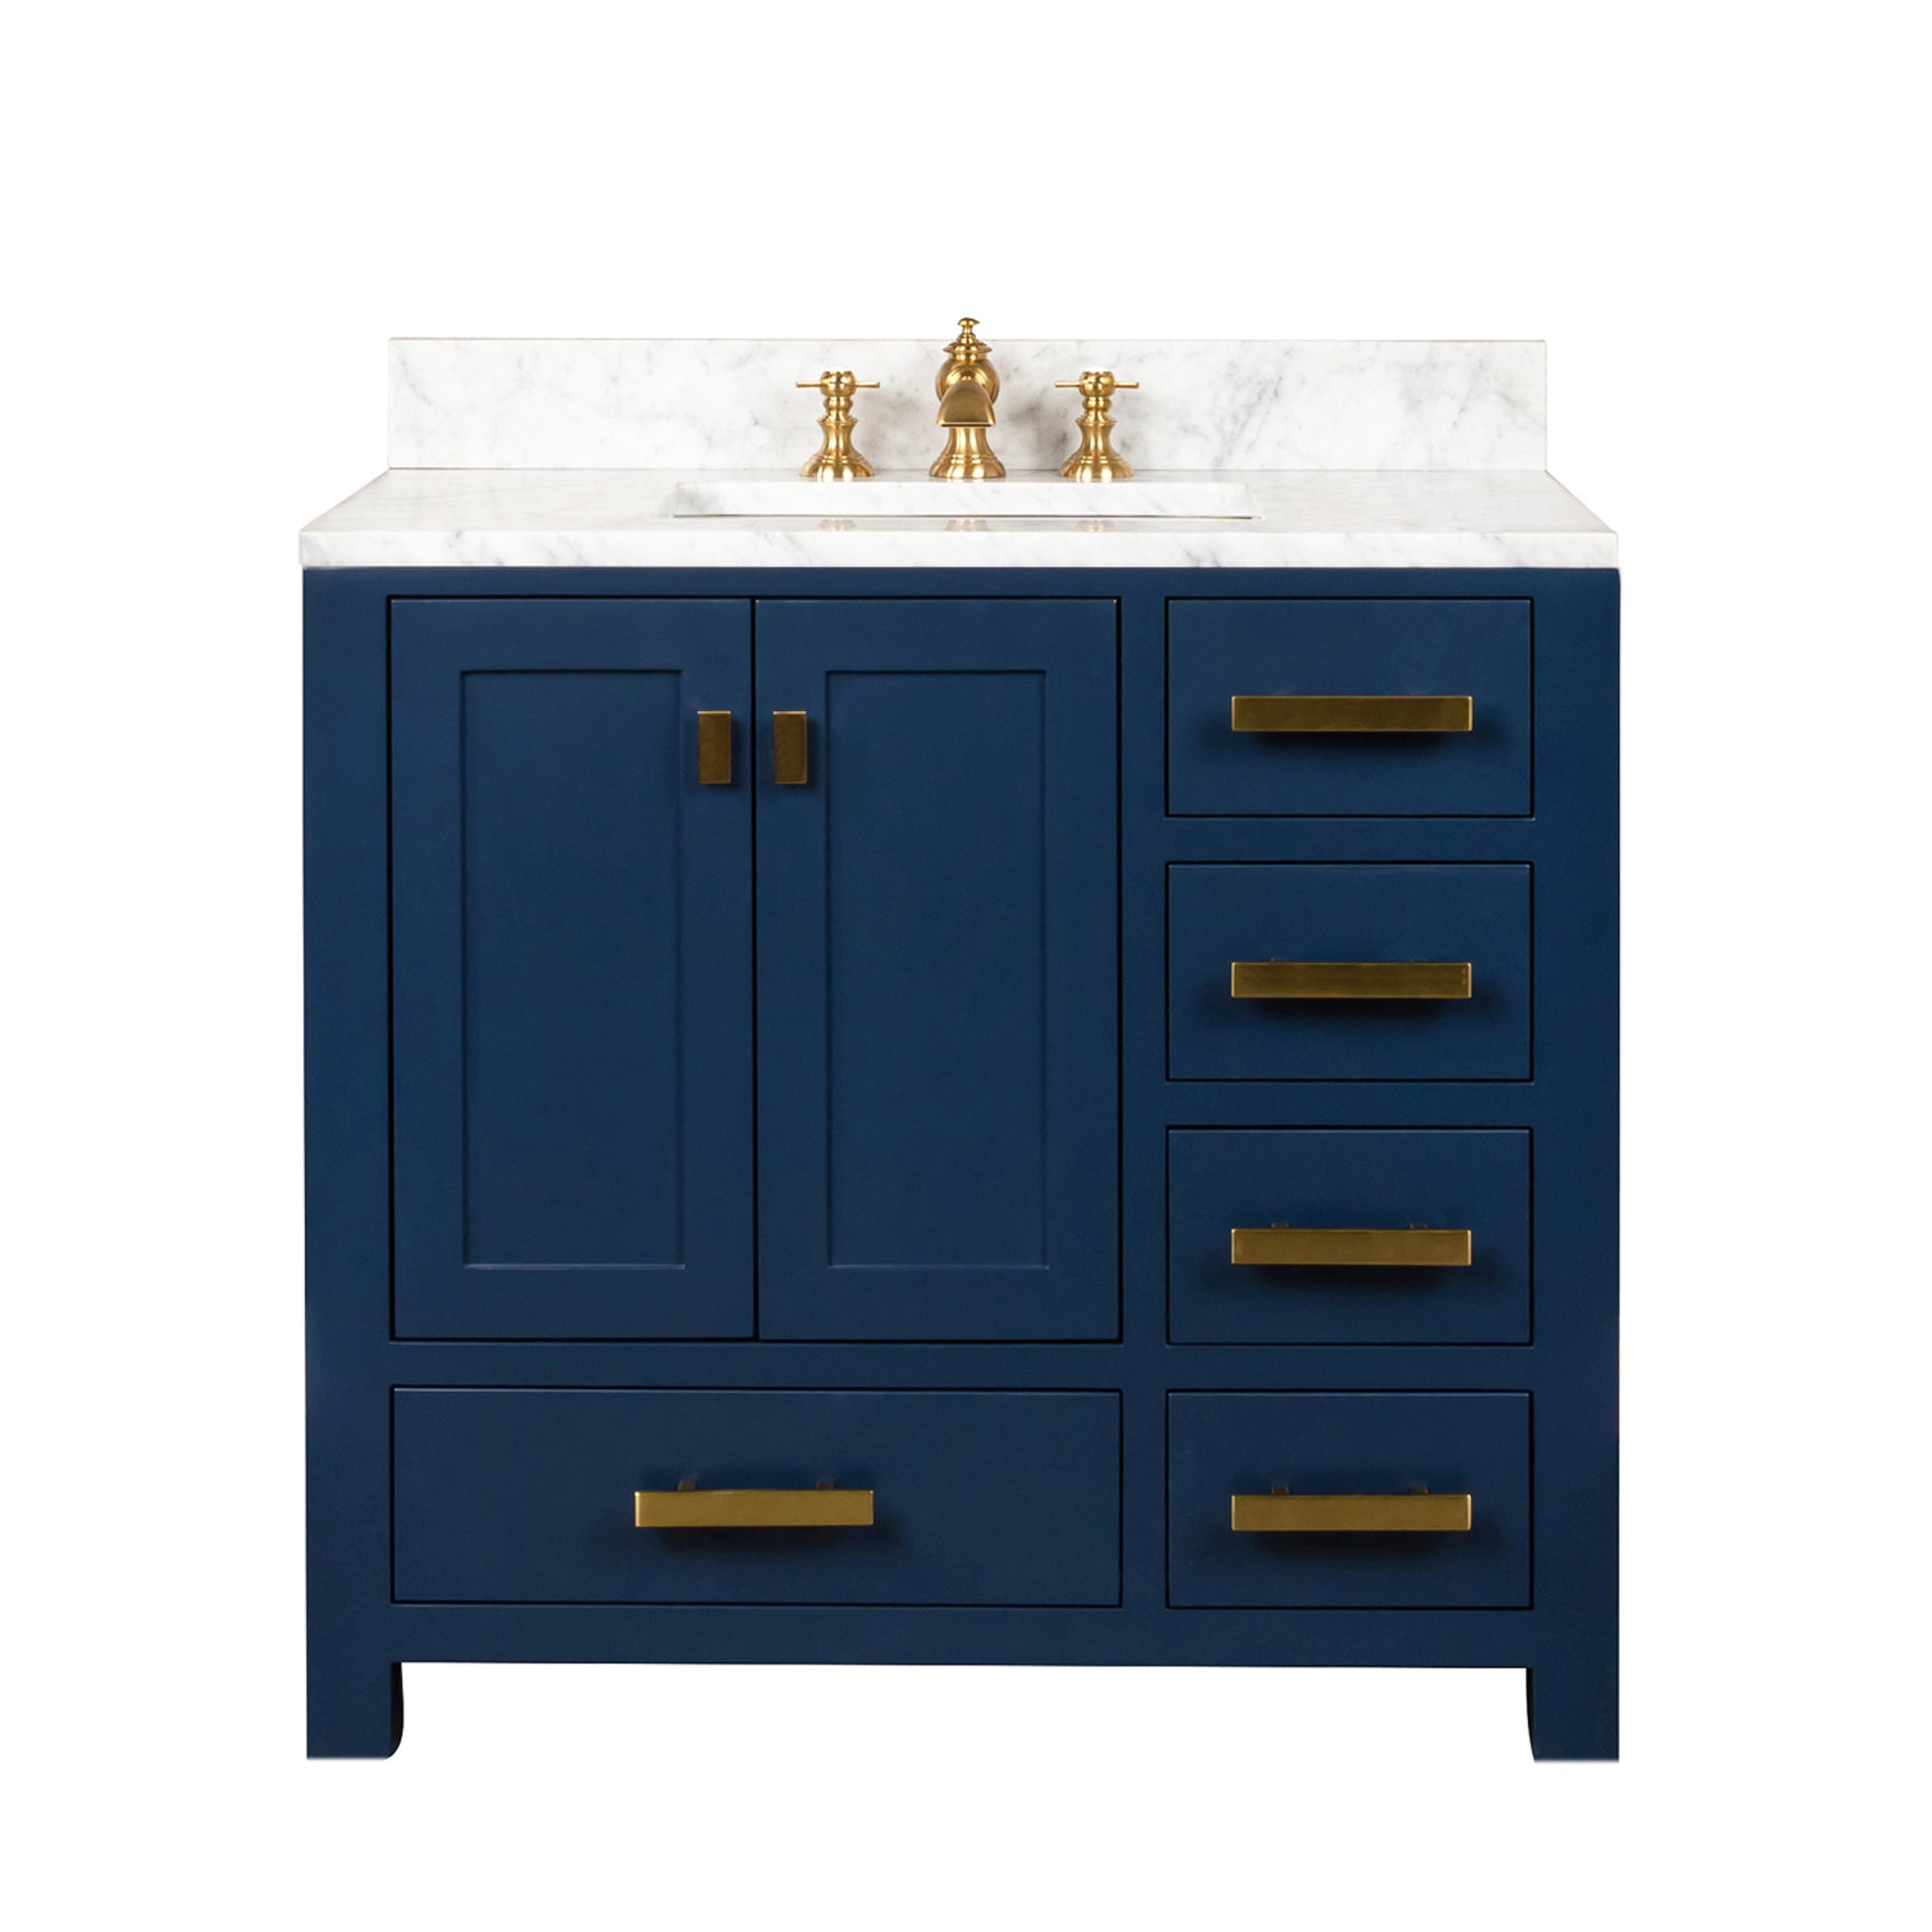 Water Creation | Madison 36-Inch Single Sink Carrara White Marble Vanity In Monarch Blue With F2-0013-06-FX Lavatory Faucet | MS36CW06MB-000FX1306